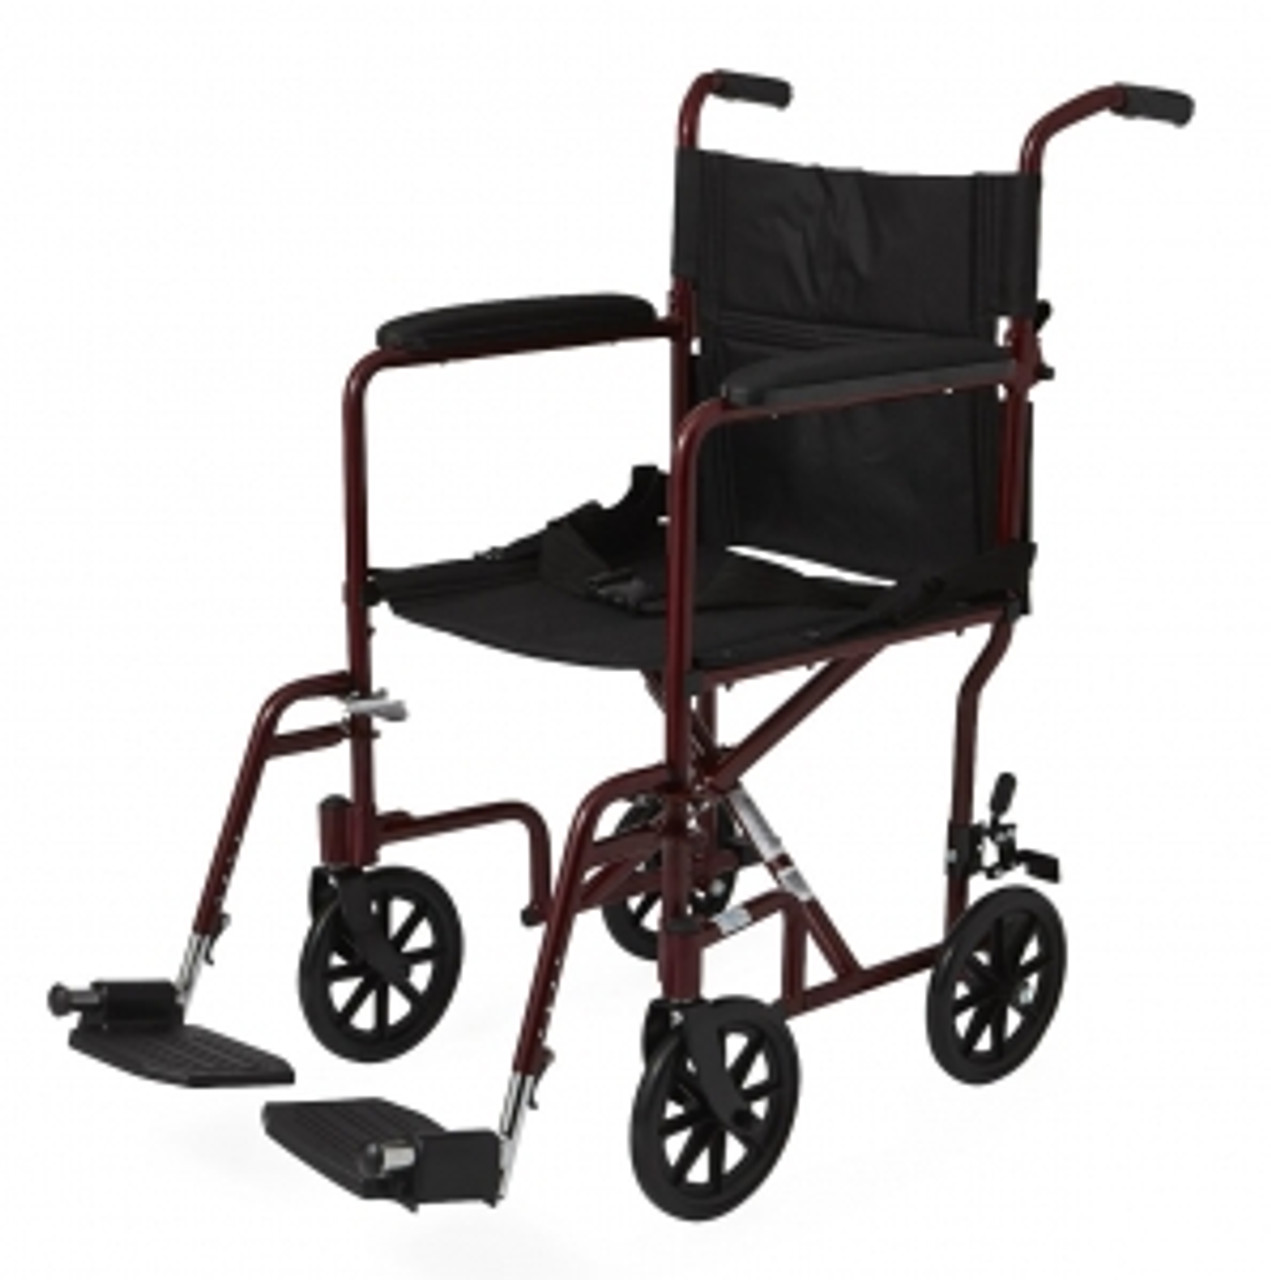 Powder-coated aluminum frame is lightweight and durable, and the back folds down for easy storage and transport
Features include a seat belt for safety, comfortable nylon upholstery, and padded arms
300-lb. (136 kg) weight capacity
Optional accessories: IV Pole (item MDS85183FT*), O2 Holder (item MDS85181FT*),O2/IV Combo (item MDS85190FT*), Anti-Tip Device (item MDS85189FT), Carrying Case with Strap (item MDSCHAIRCASE), Antifold Antitheft Device (item MDS85196), Tinnerman Leg Rest Locks (item WCA806991)